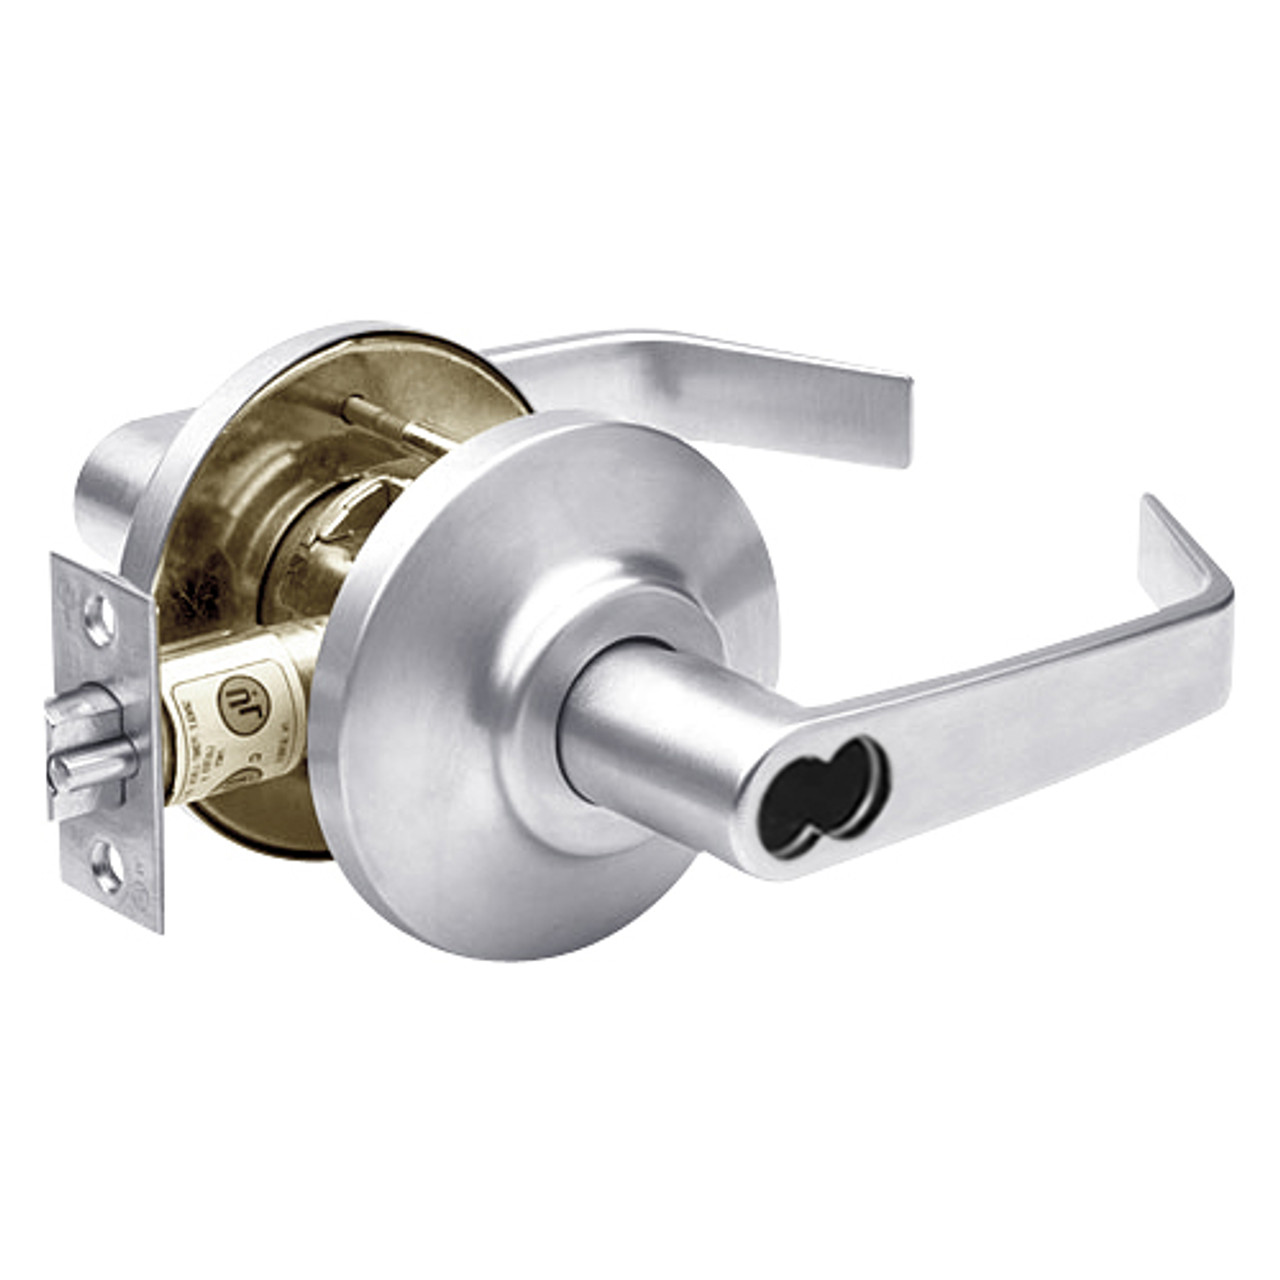 7KC57AB15DSTK625 Best 7KC Series Entrance Medium Duty Cylindrical Lever Locks with Contour Angle Return Design in Bright Chrome